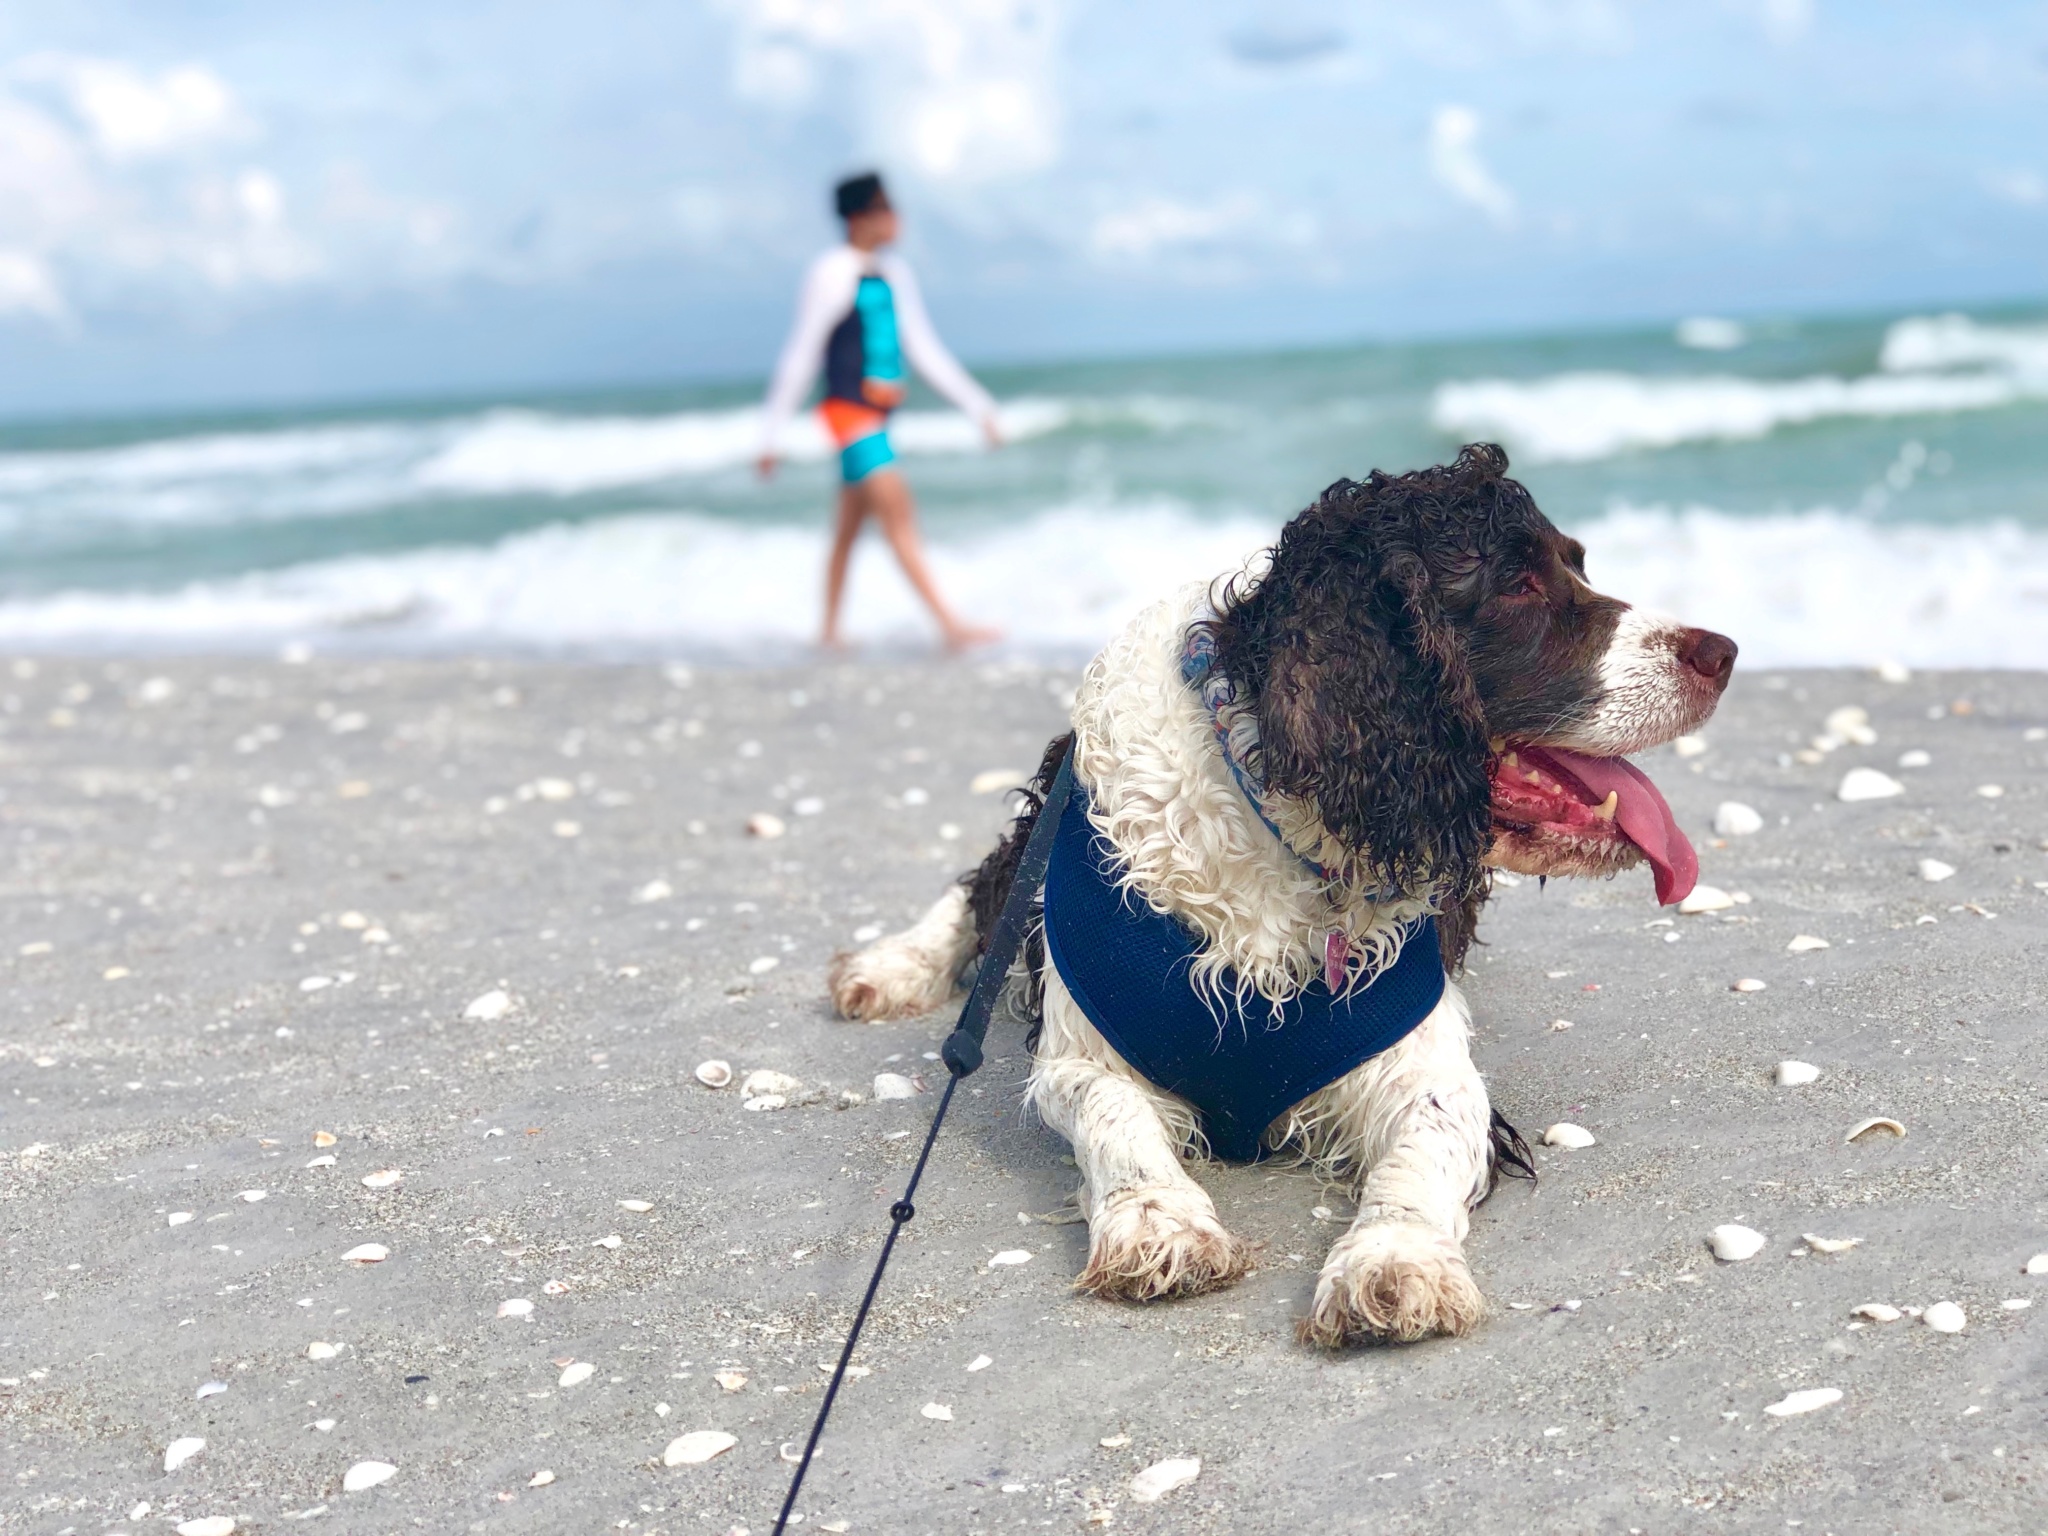 Tips for Taking Your Dog to the Beach